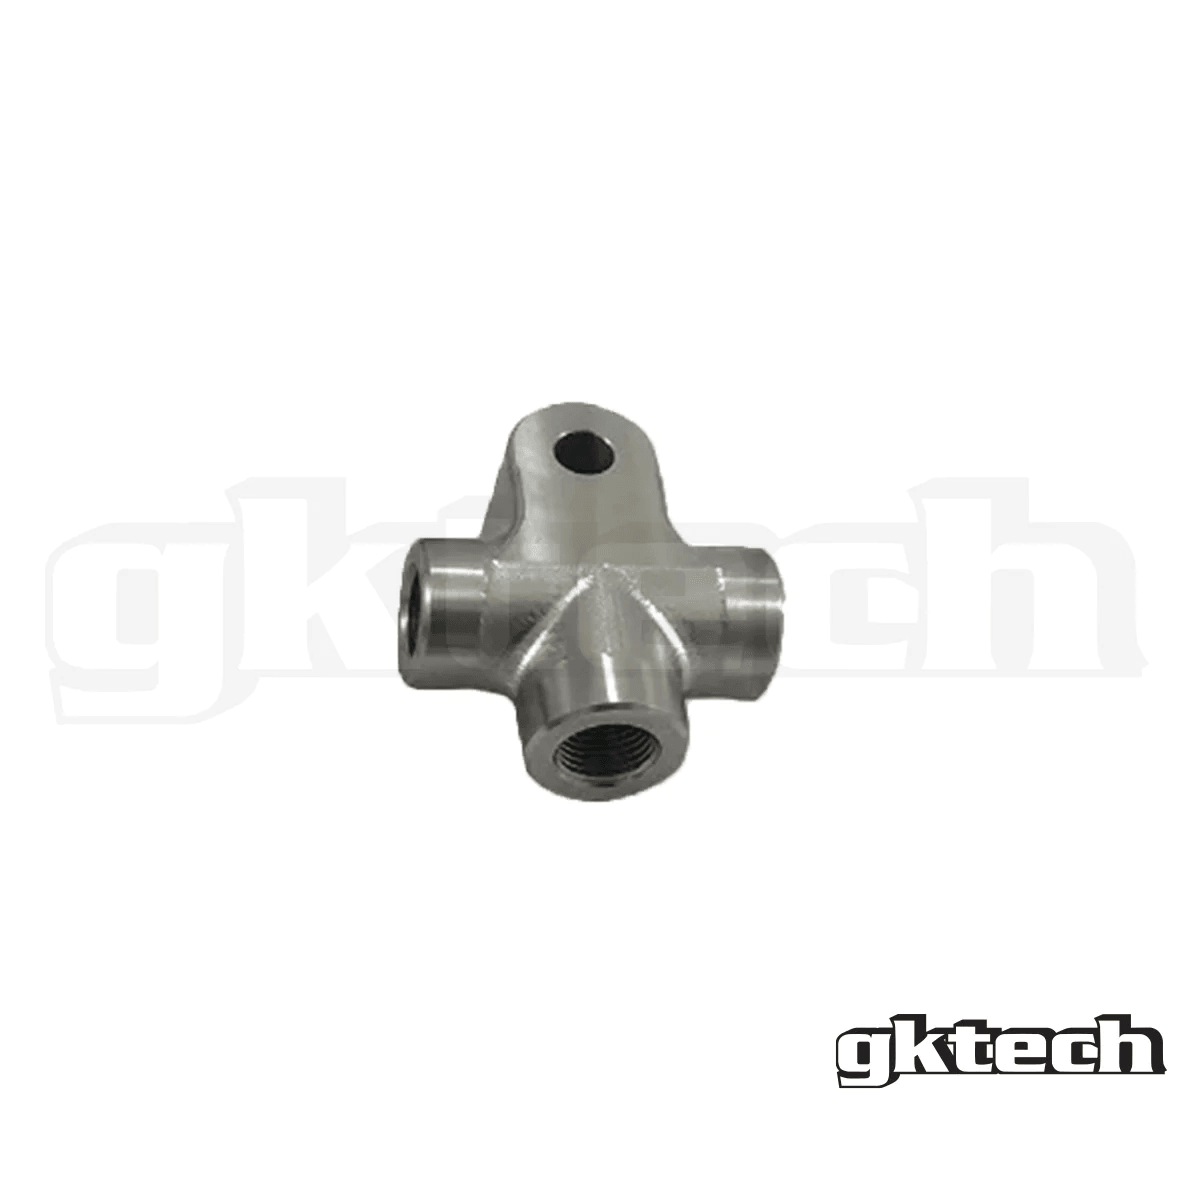 Gktech Stainless Steel 3 Way Brake Union - Prolink Performance